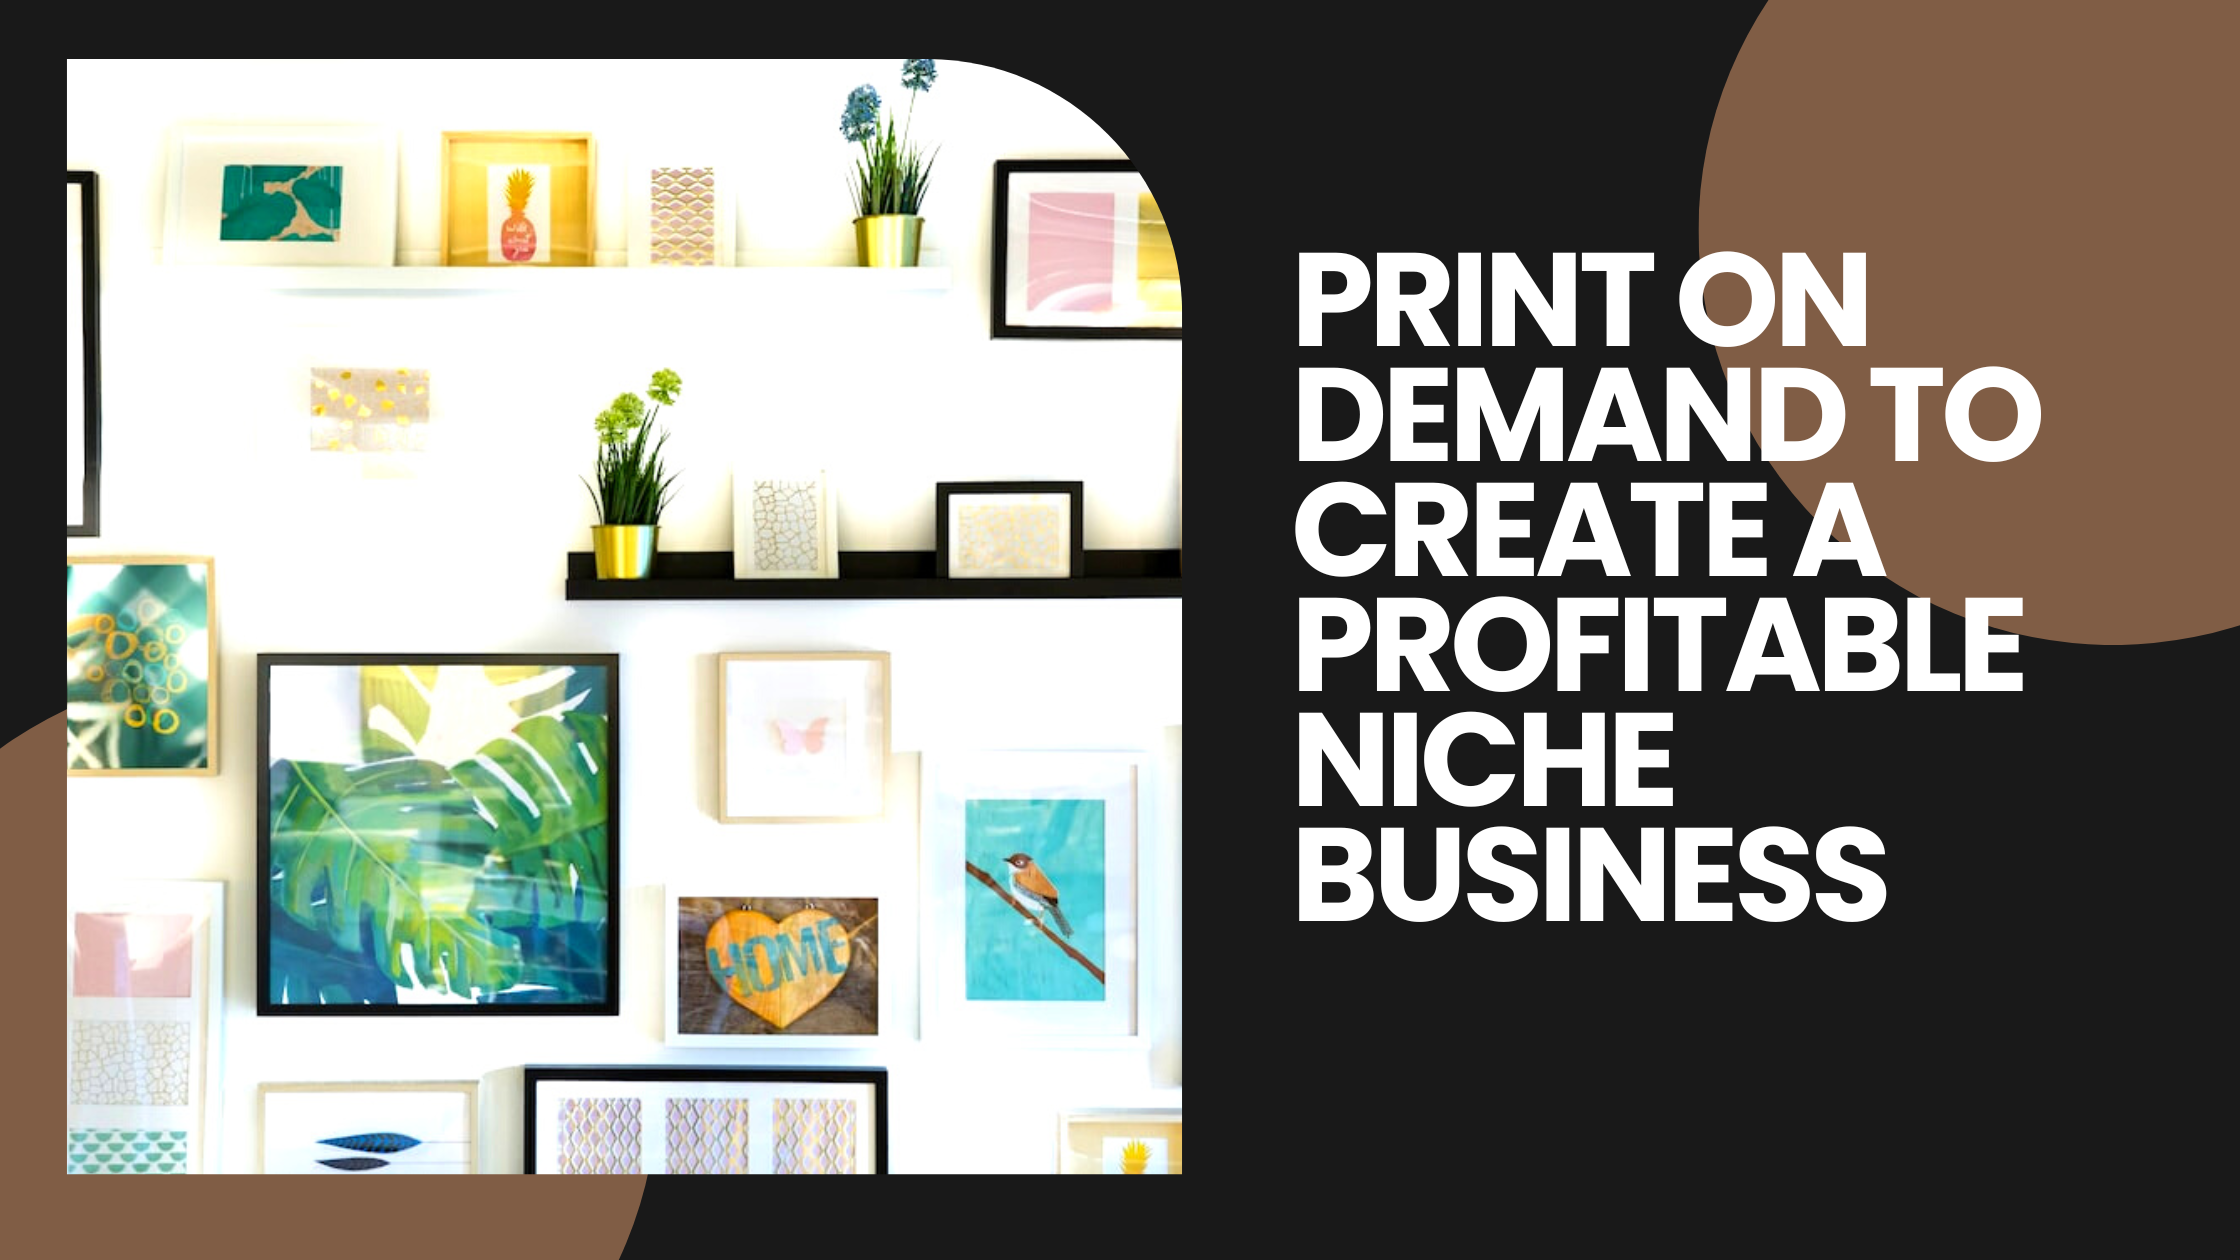 How to Use Print on Demand to Create a Profitable Niche Business